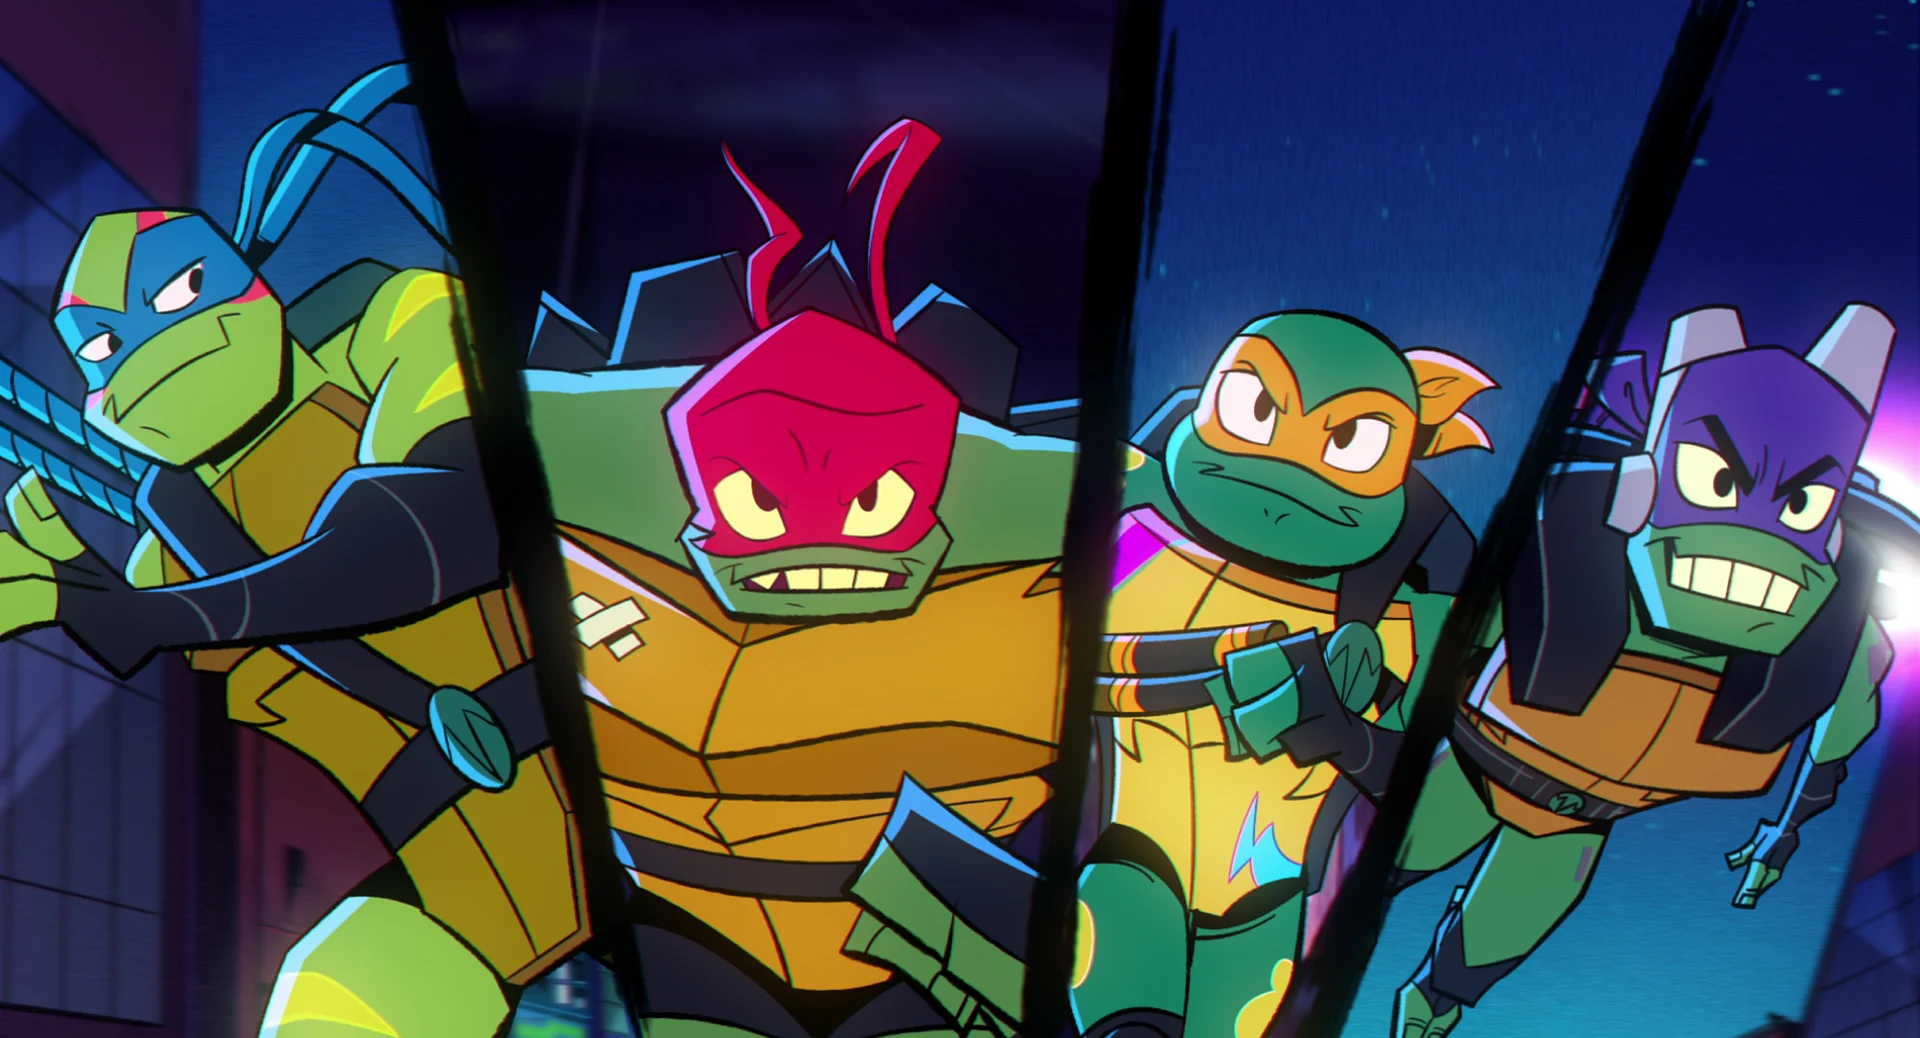 https://mamasgeeky.com/wp-content/uploads/2022/08/Rise_of_the_Teenage_Mutant_Ninja_Turtles__The_Movie_review-netflix.jpg.webp